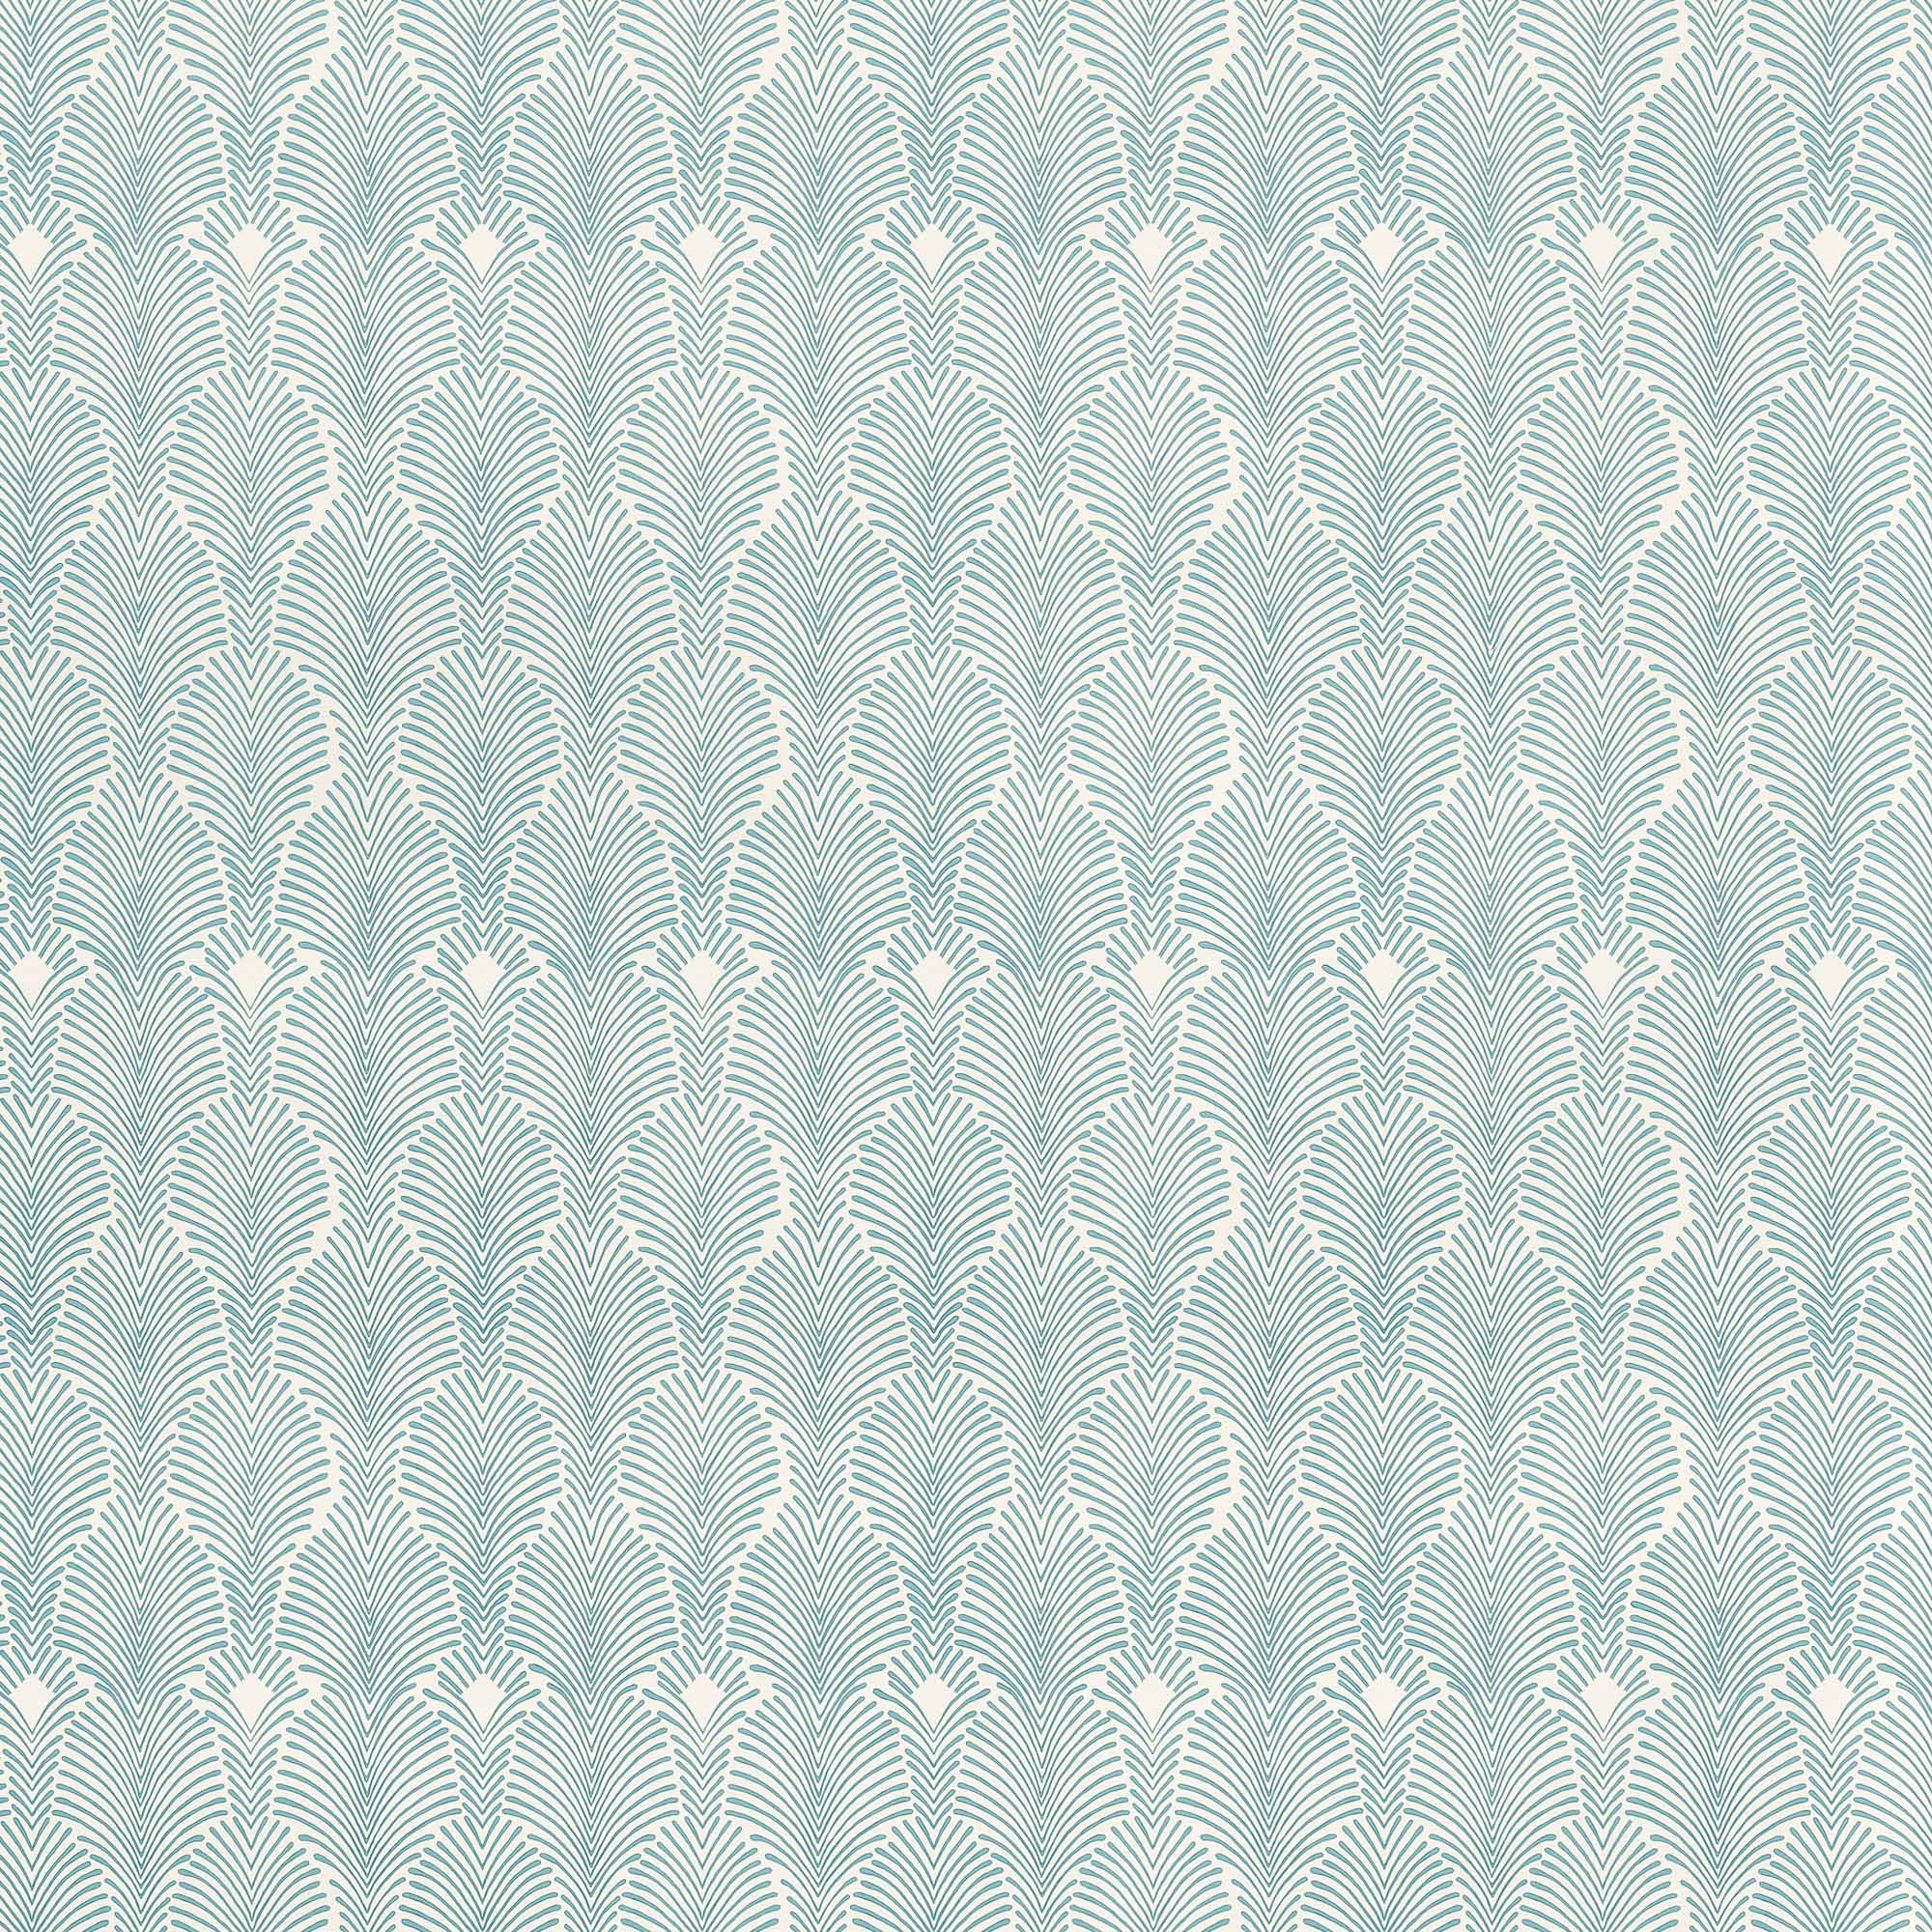 Detail of fabric in a striped damask pattern in turquoise on a cream field.